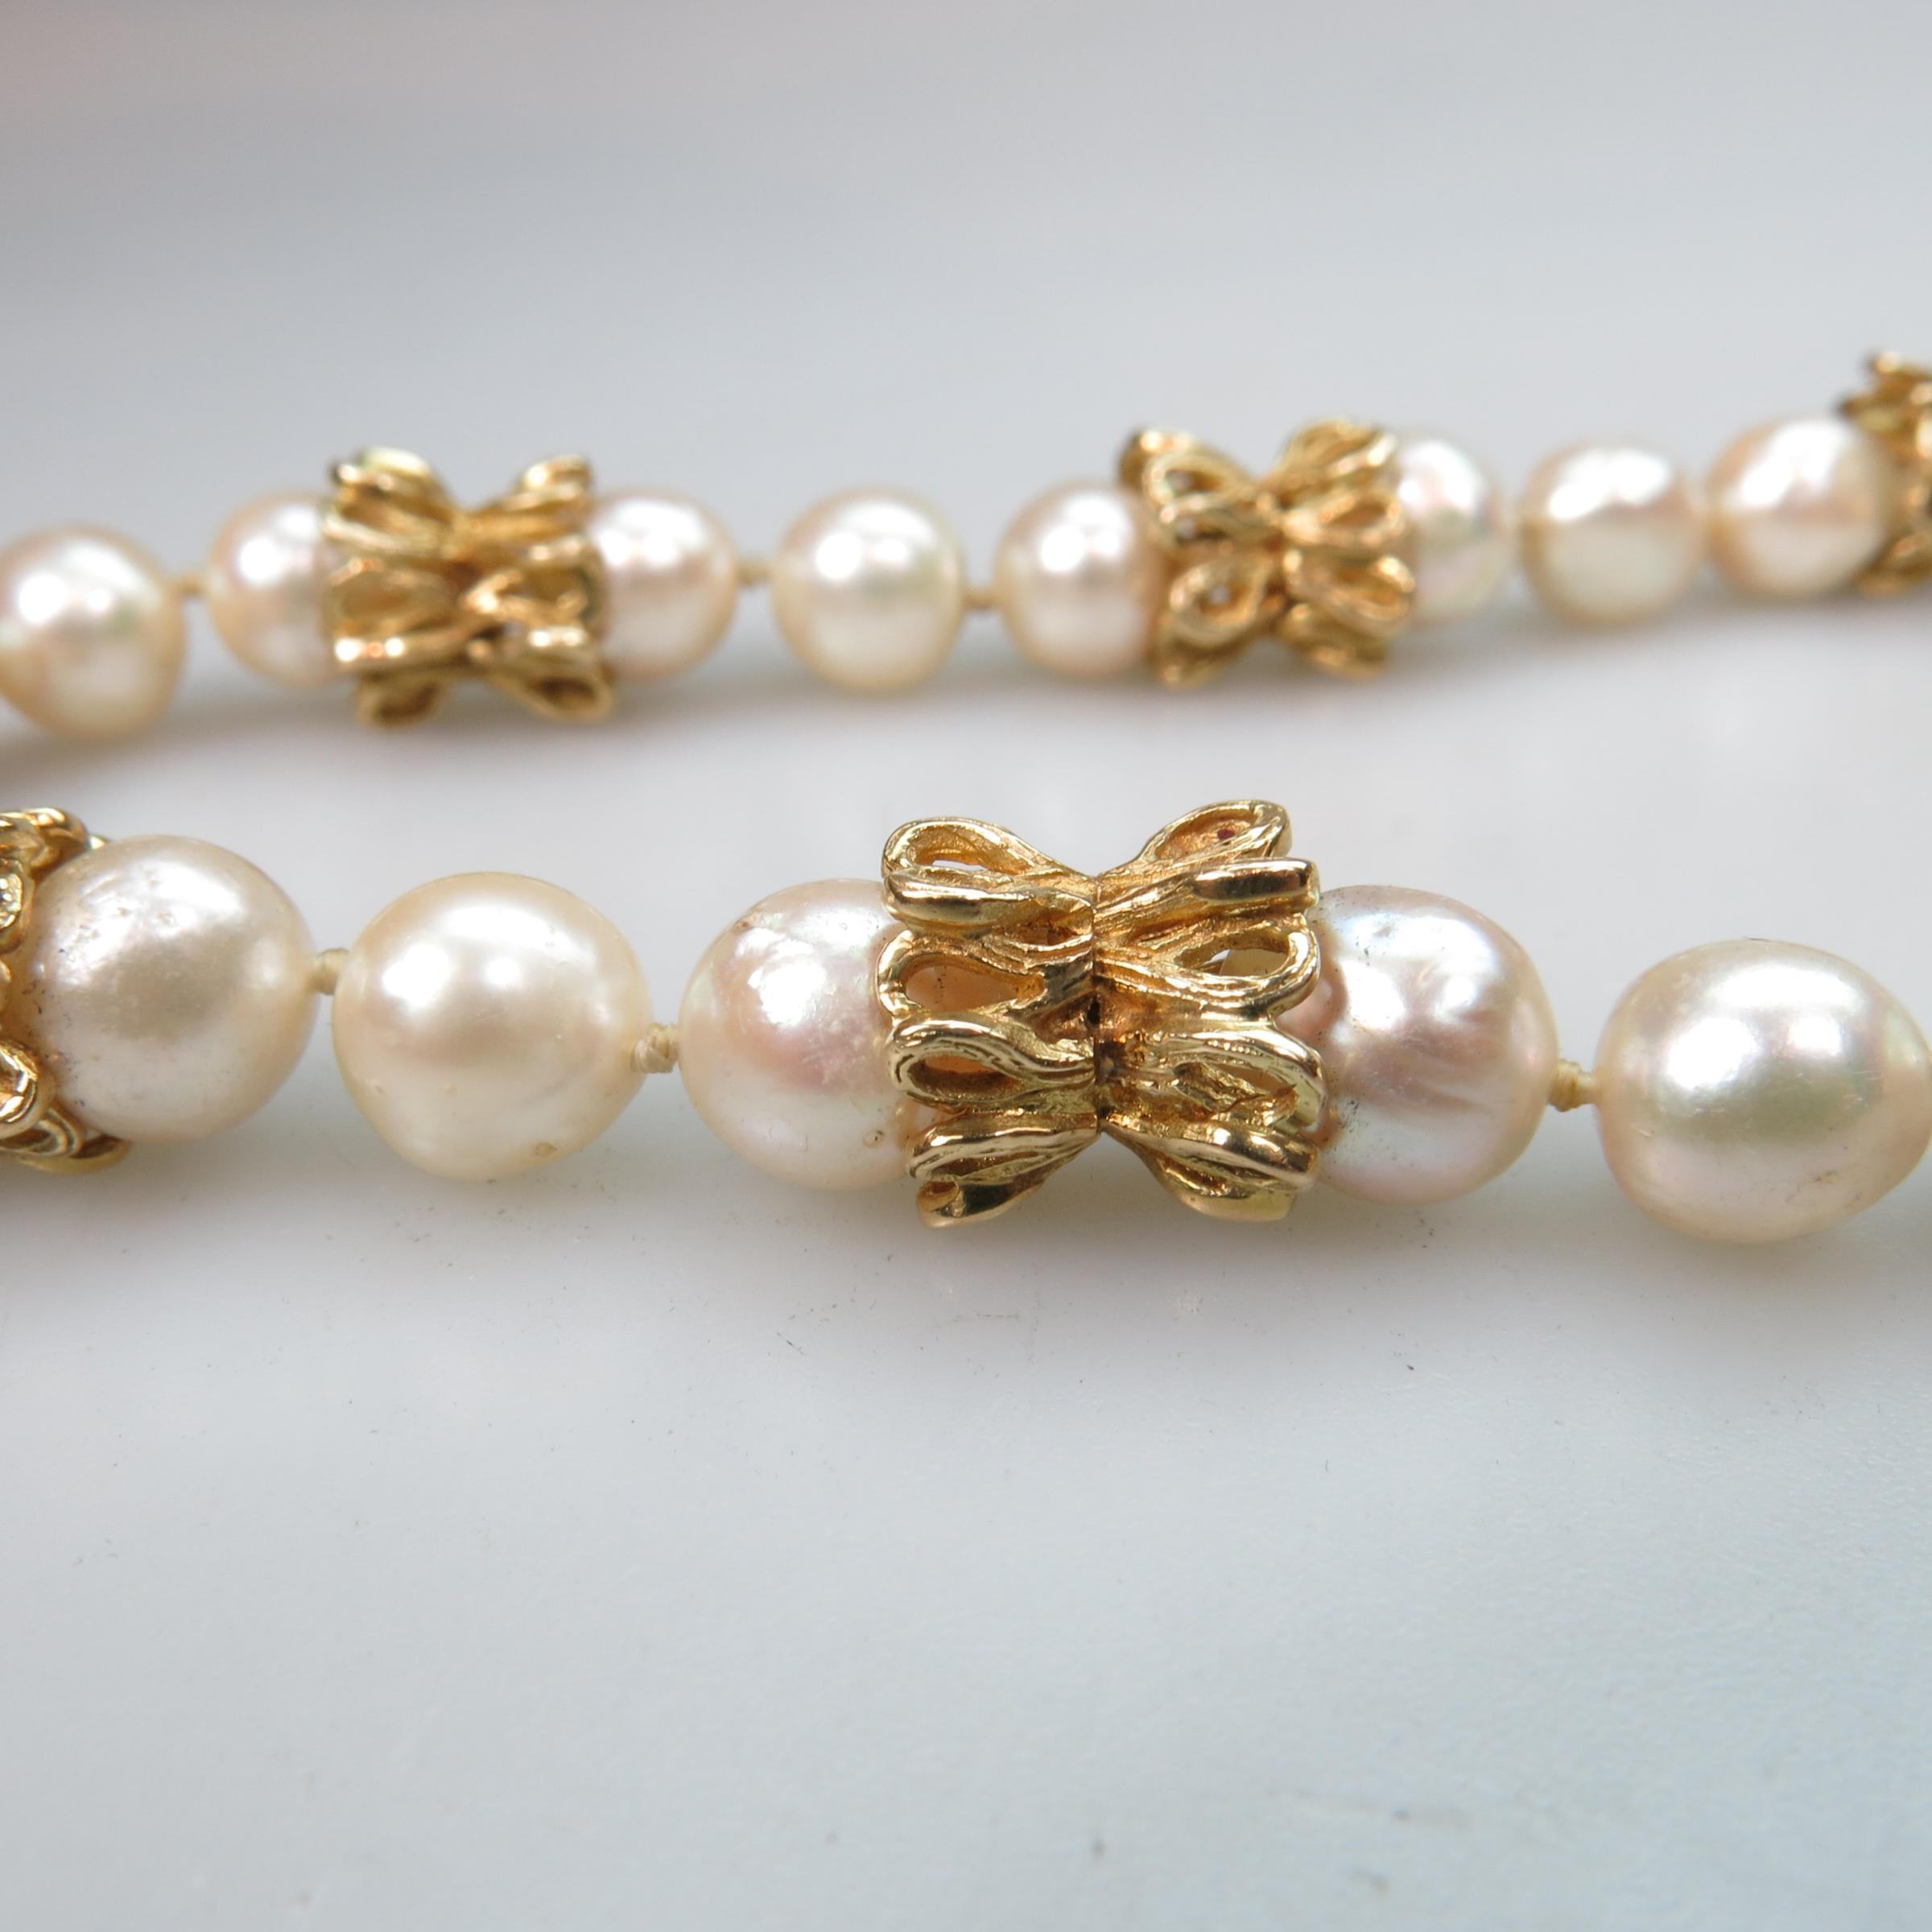 Single Endless Strand Of Cultured Baroque Pearls